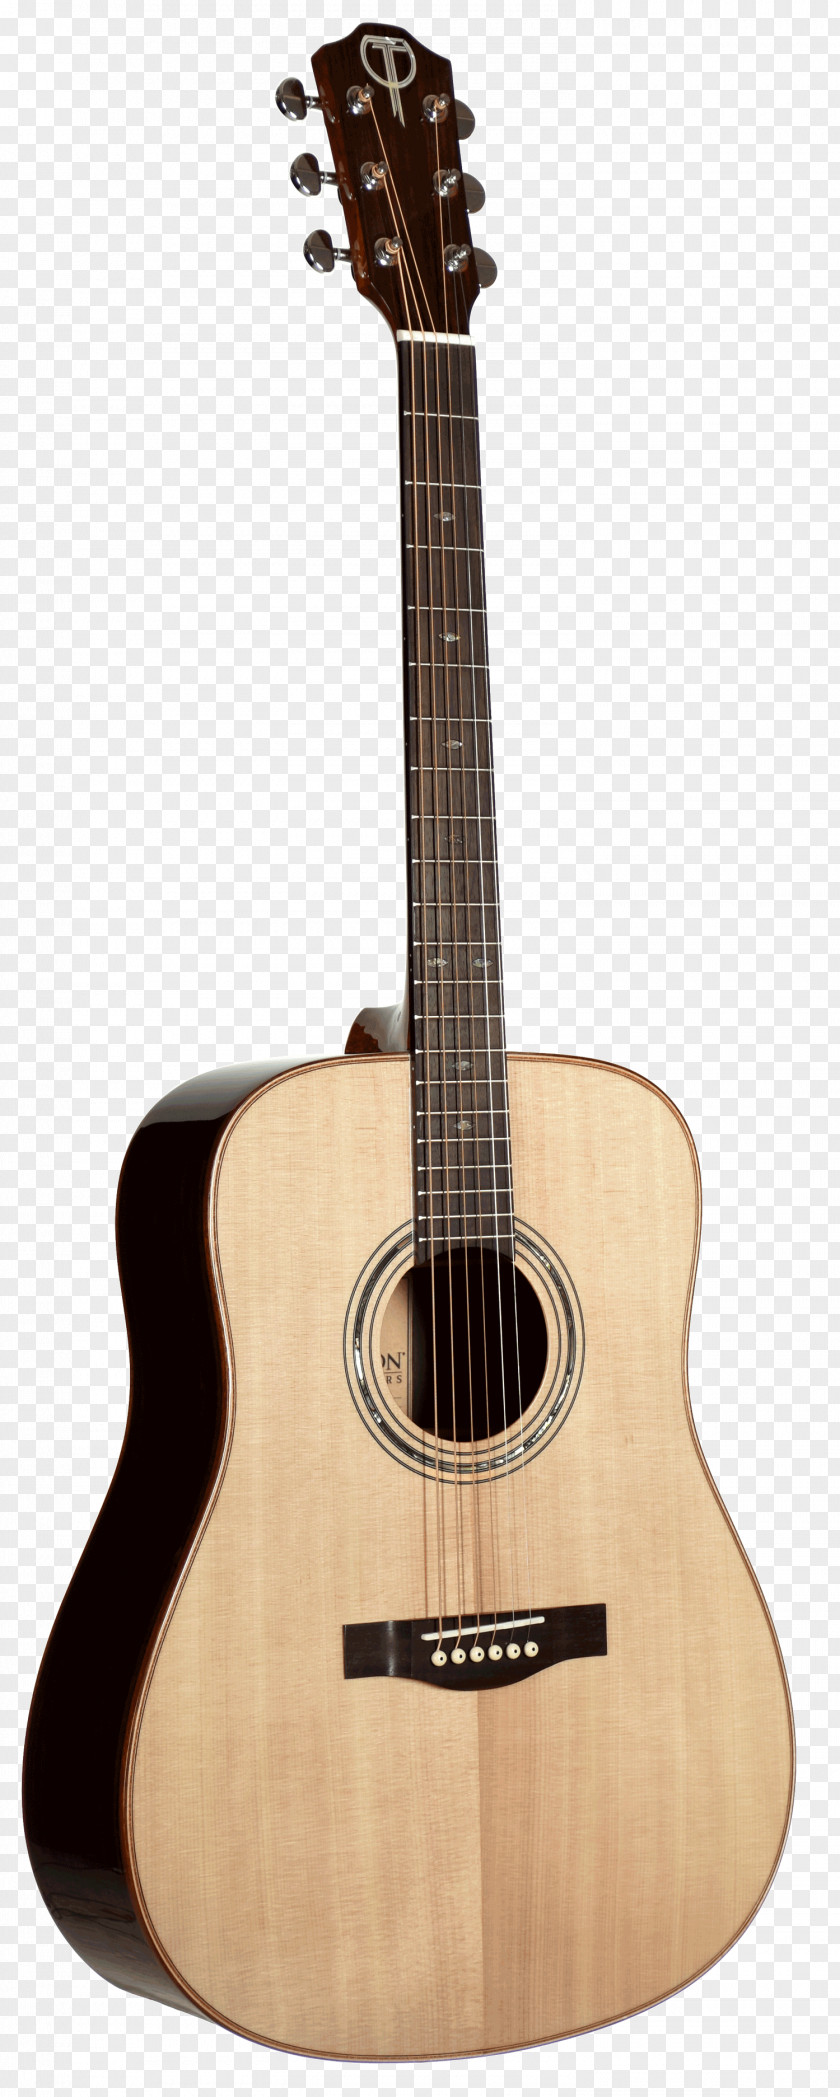 The Upper And Lower Sides Of Wind Alhambra Classical Guitar Acoustic Musical Instruments PNG